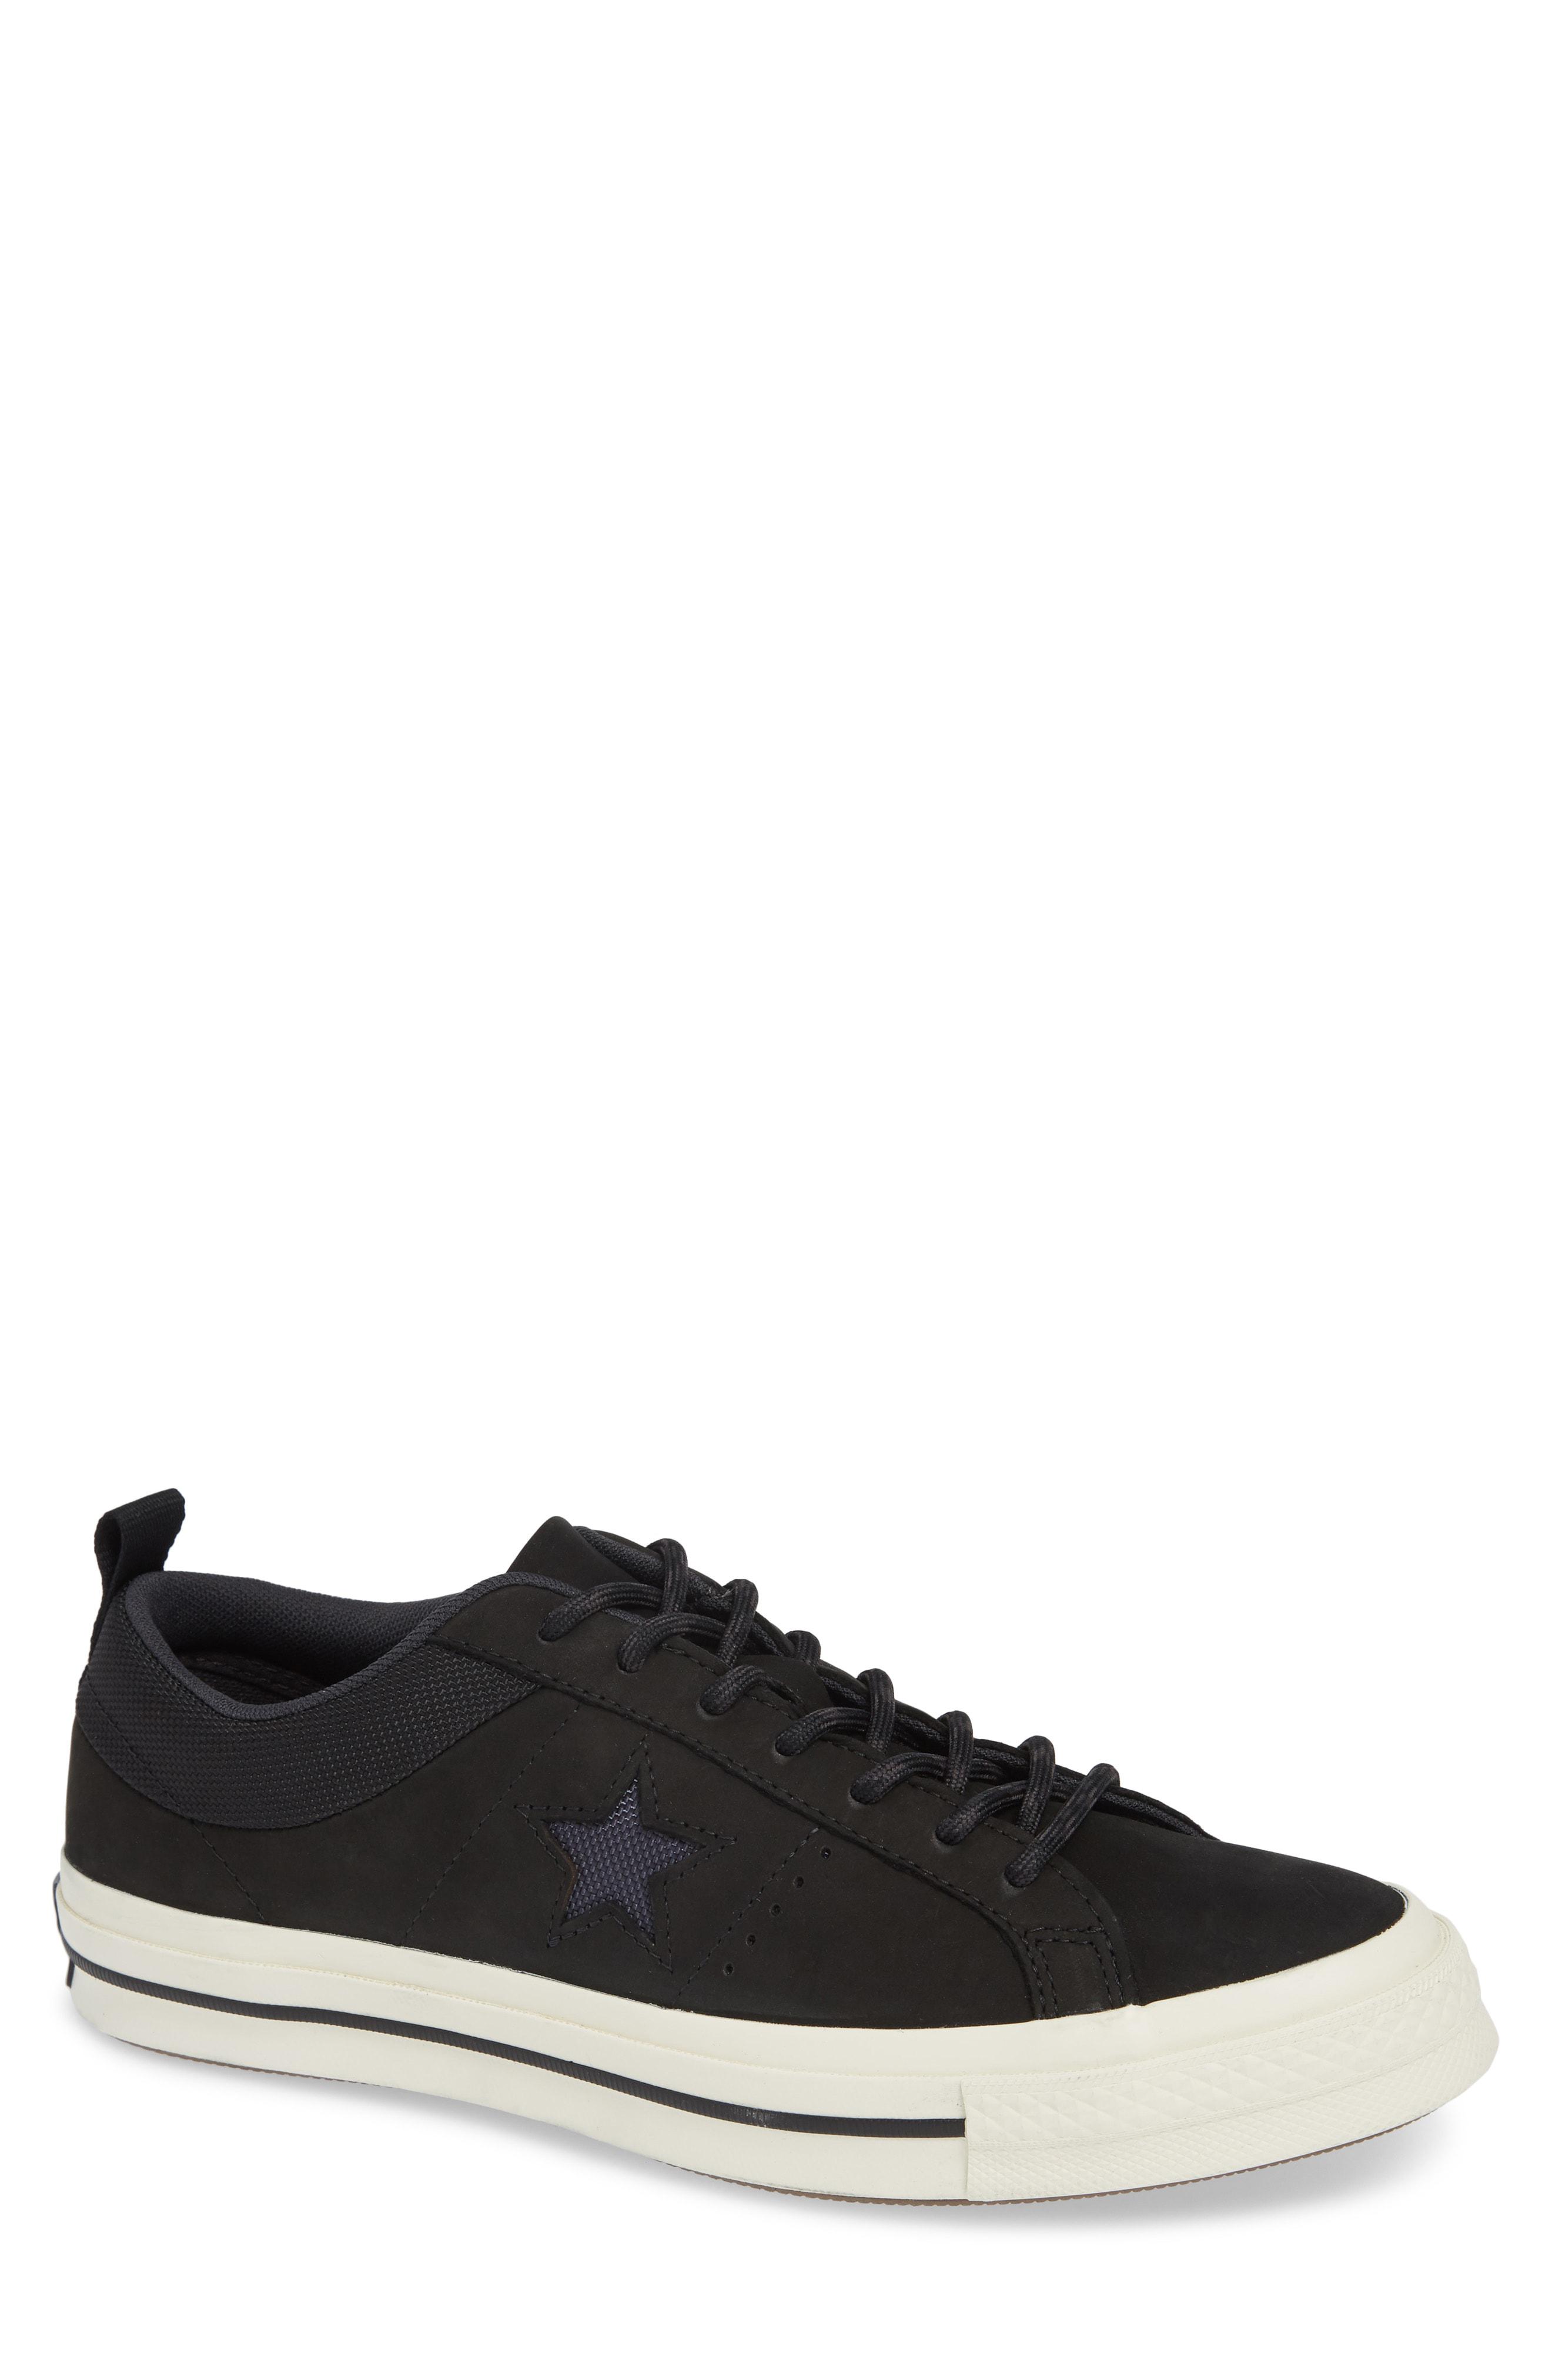 converse one star sierra leather low top